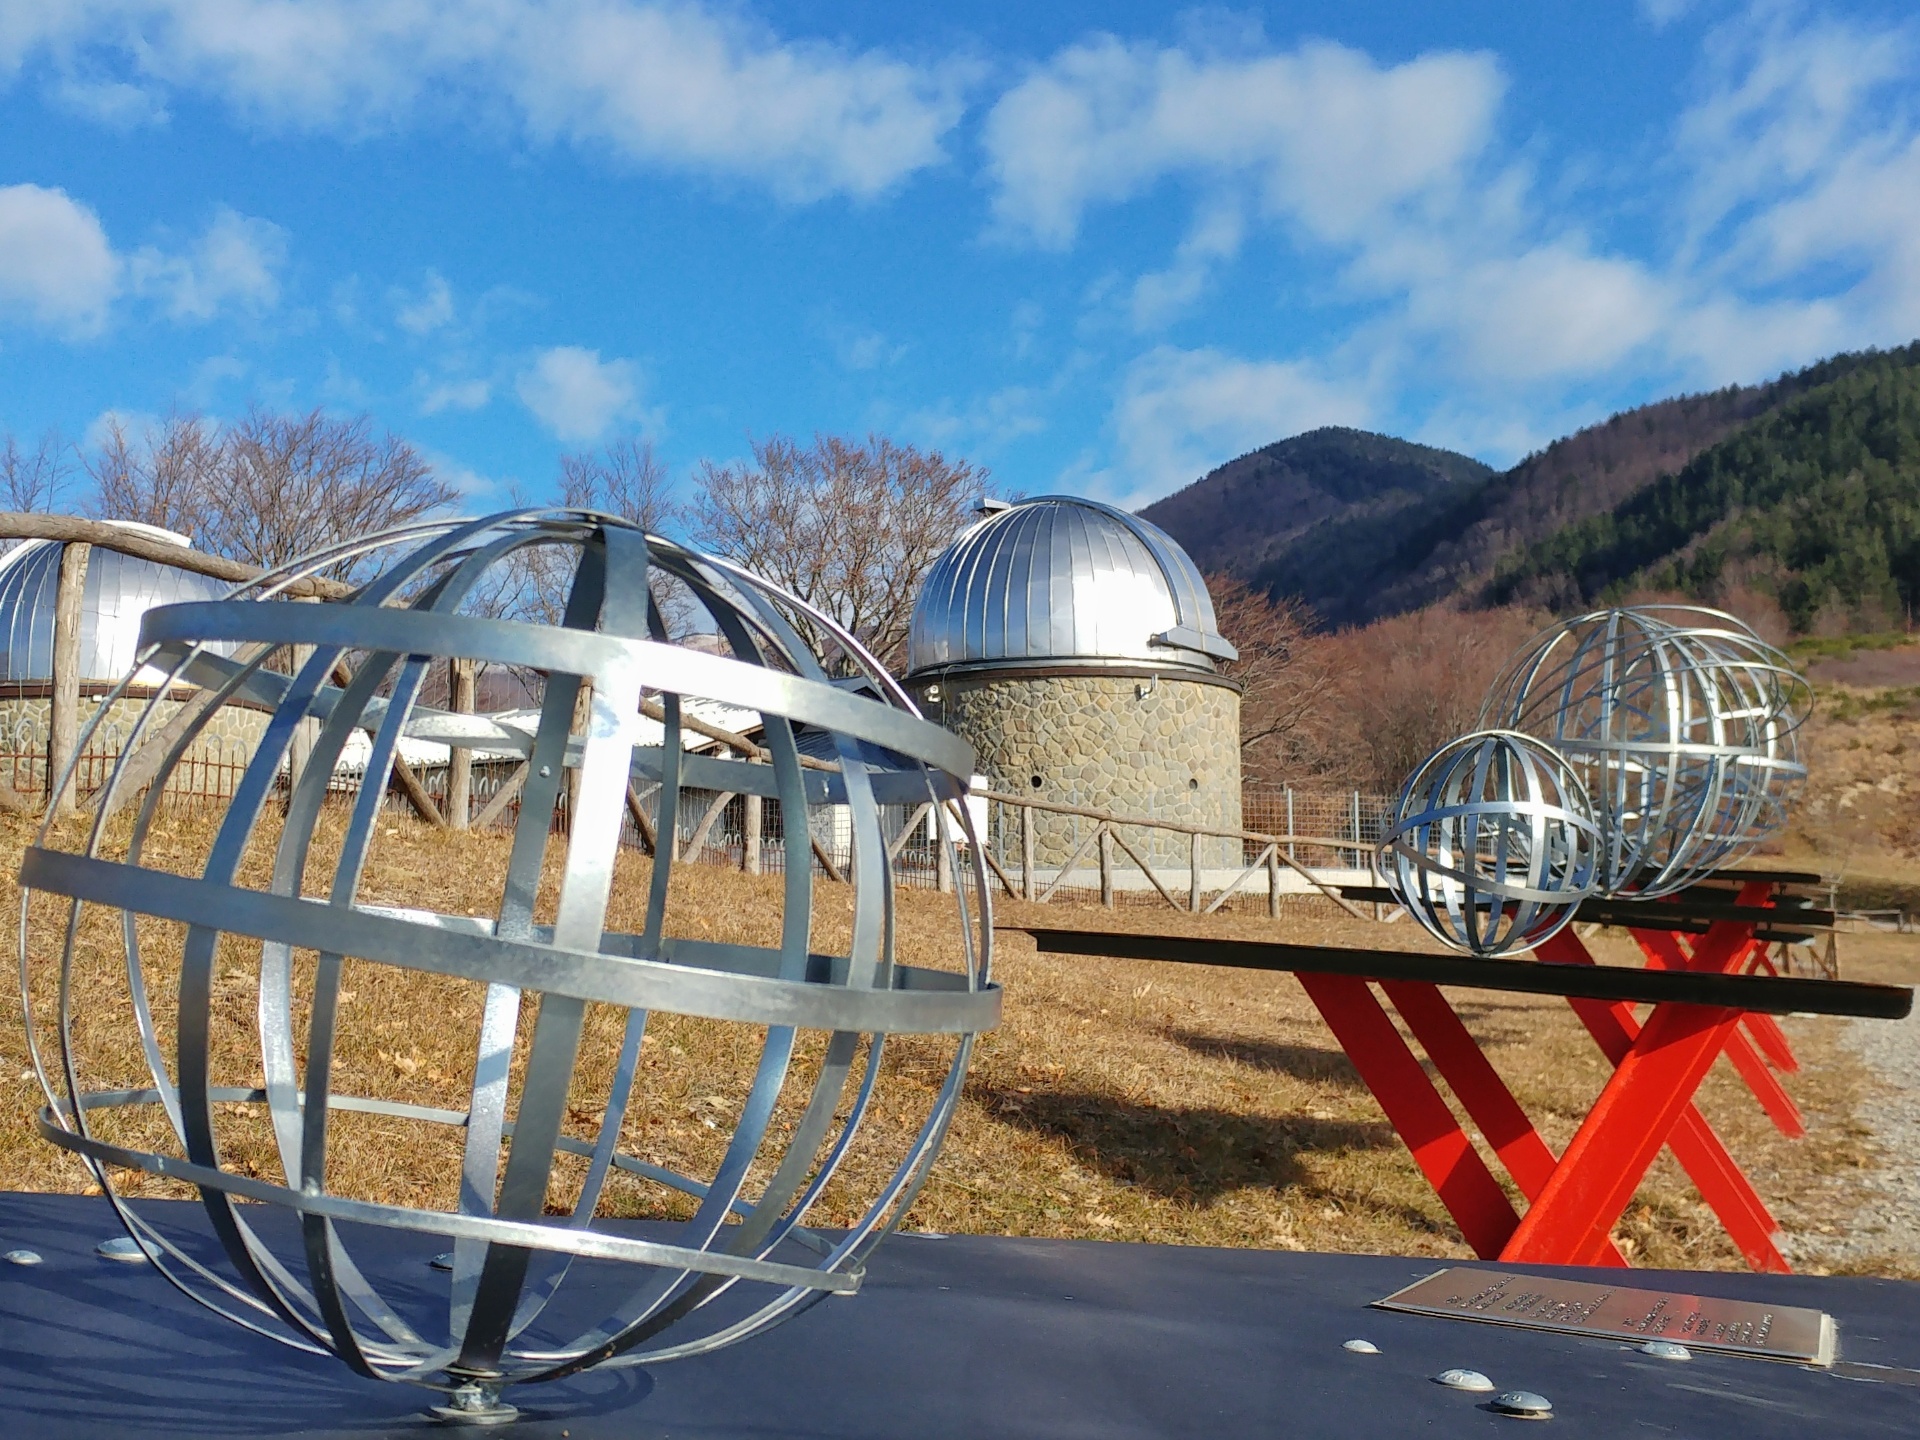 Some of the manufactured sculptures of the Stars Park representing the planets and, in the distance, the Pistoia Mountains Astronomical Observatory.